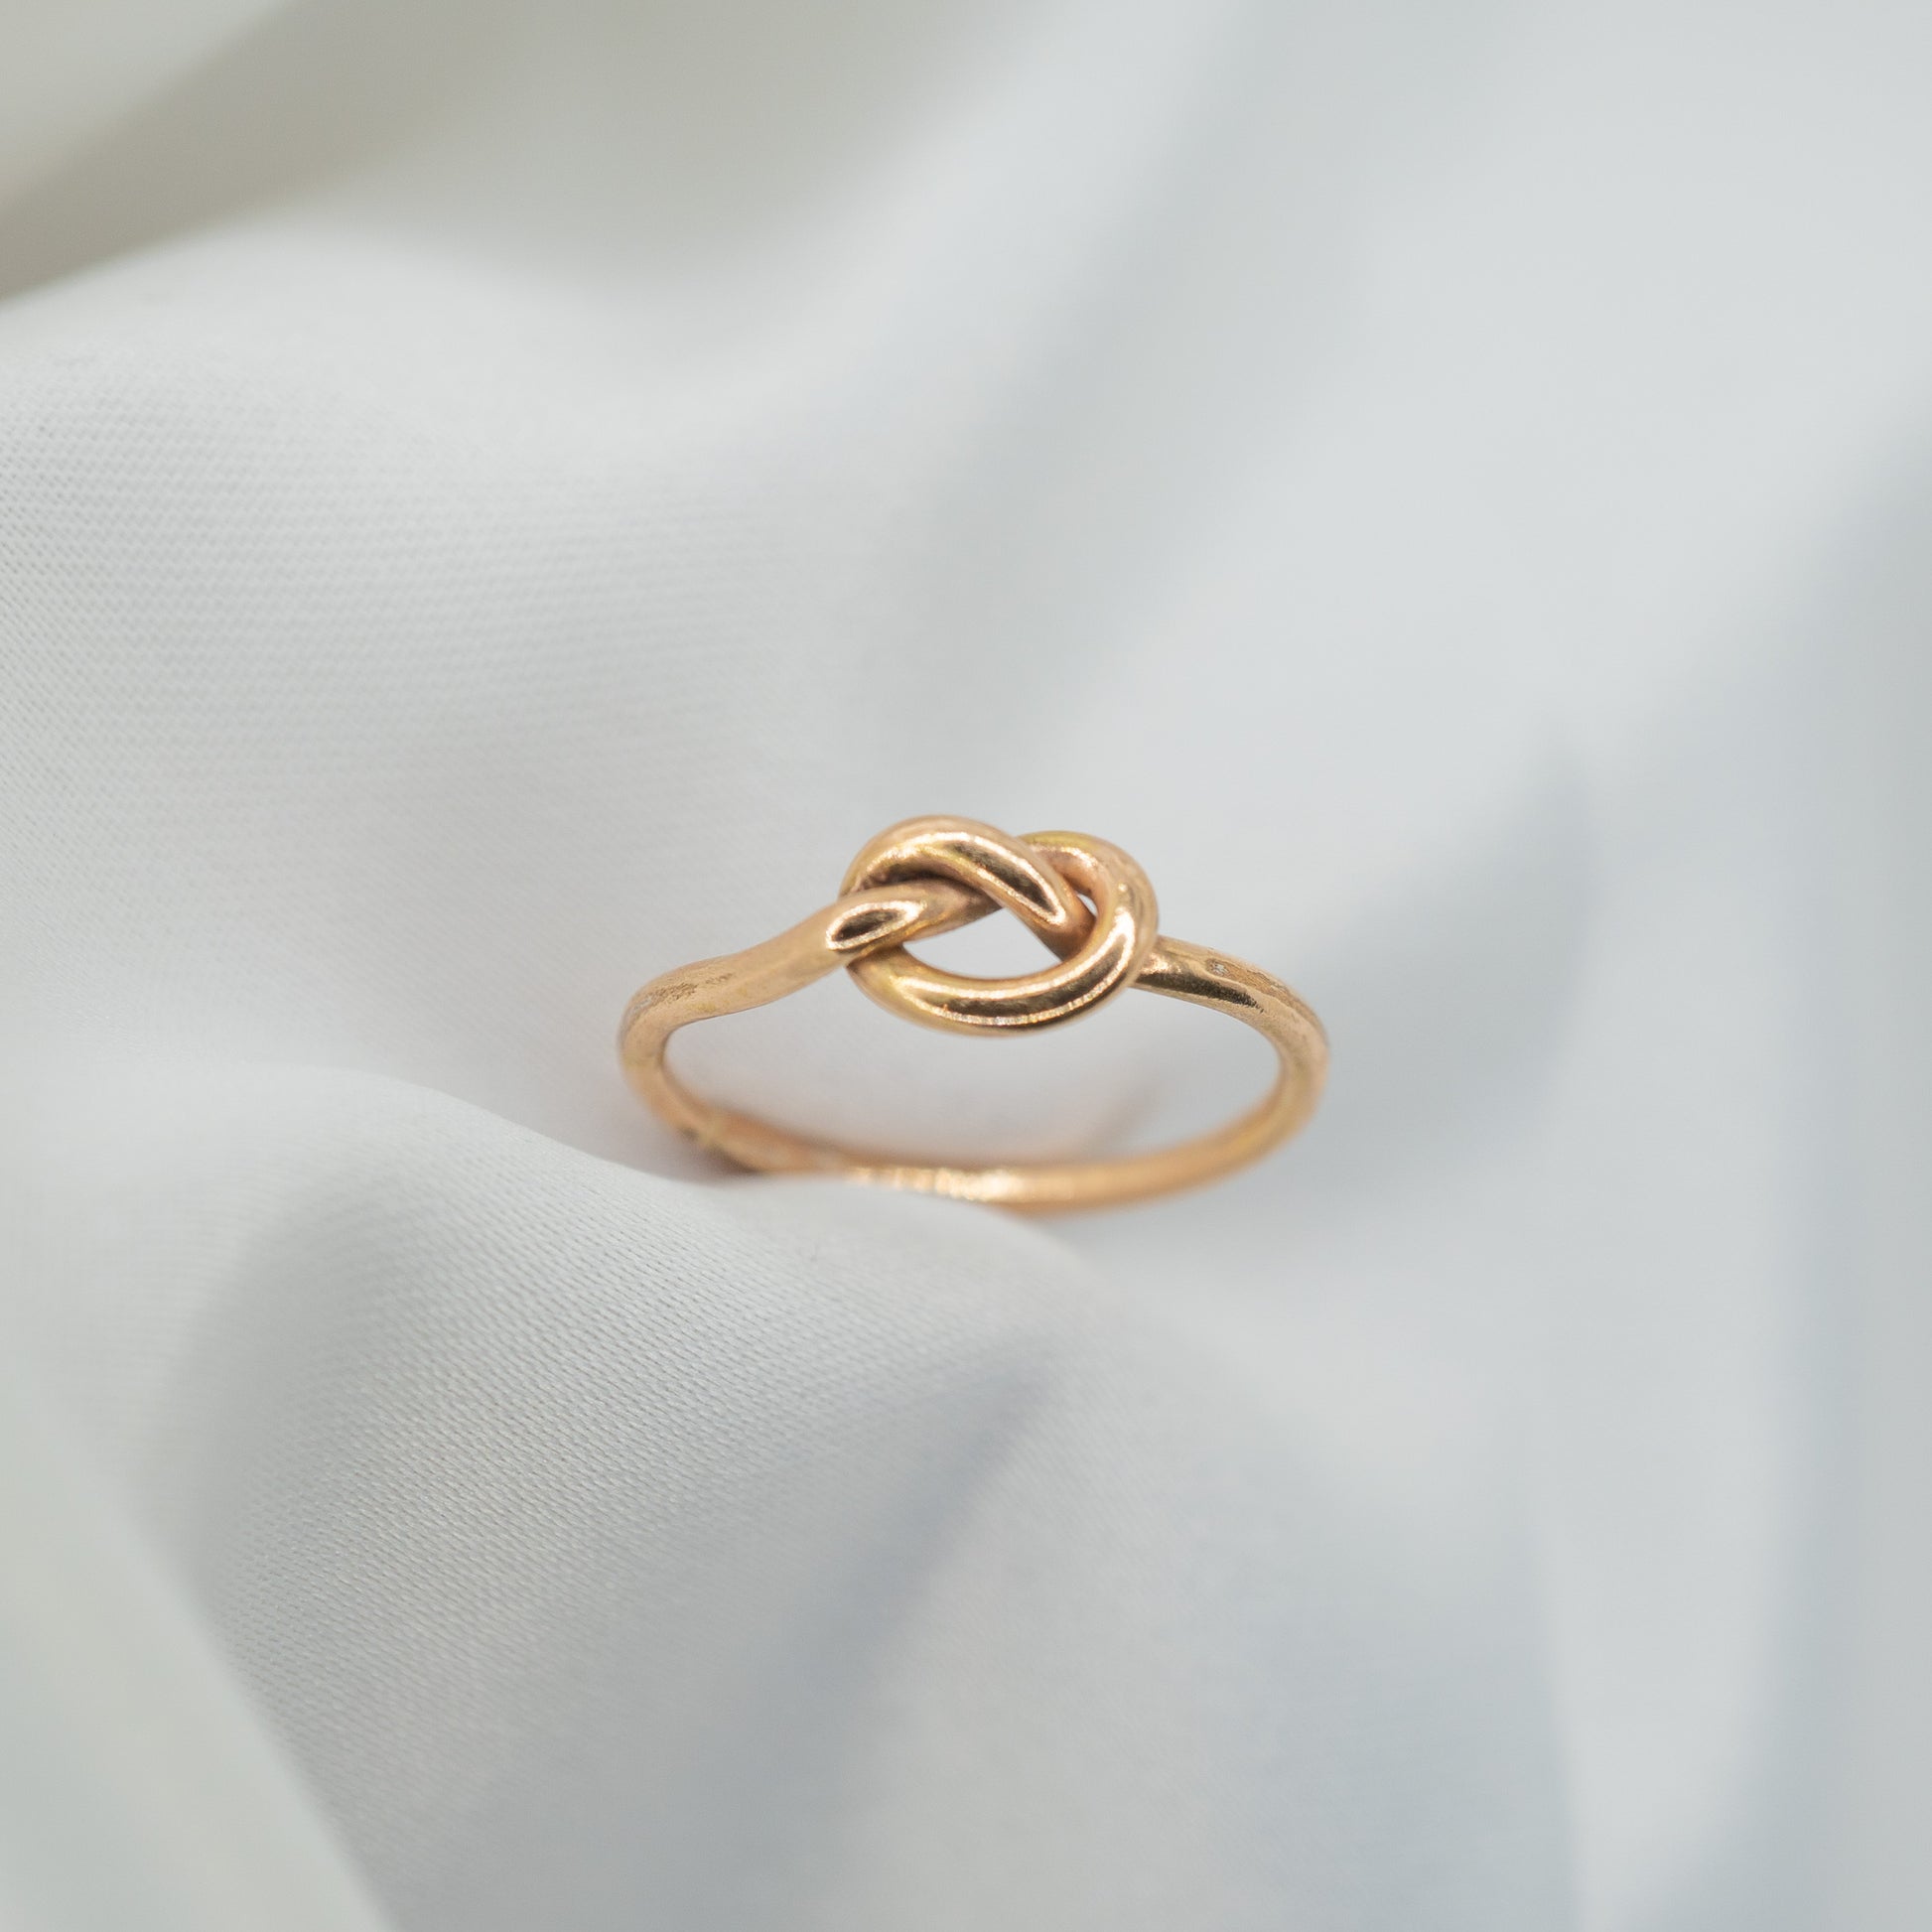 Gold Filled Knot Ring - shot on white - top view